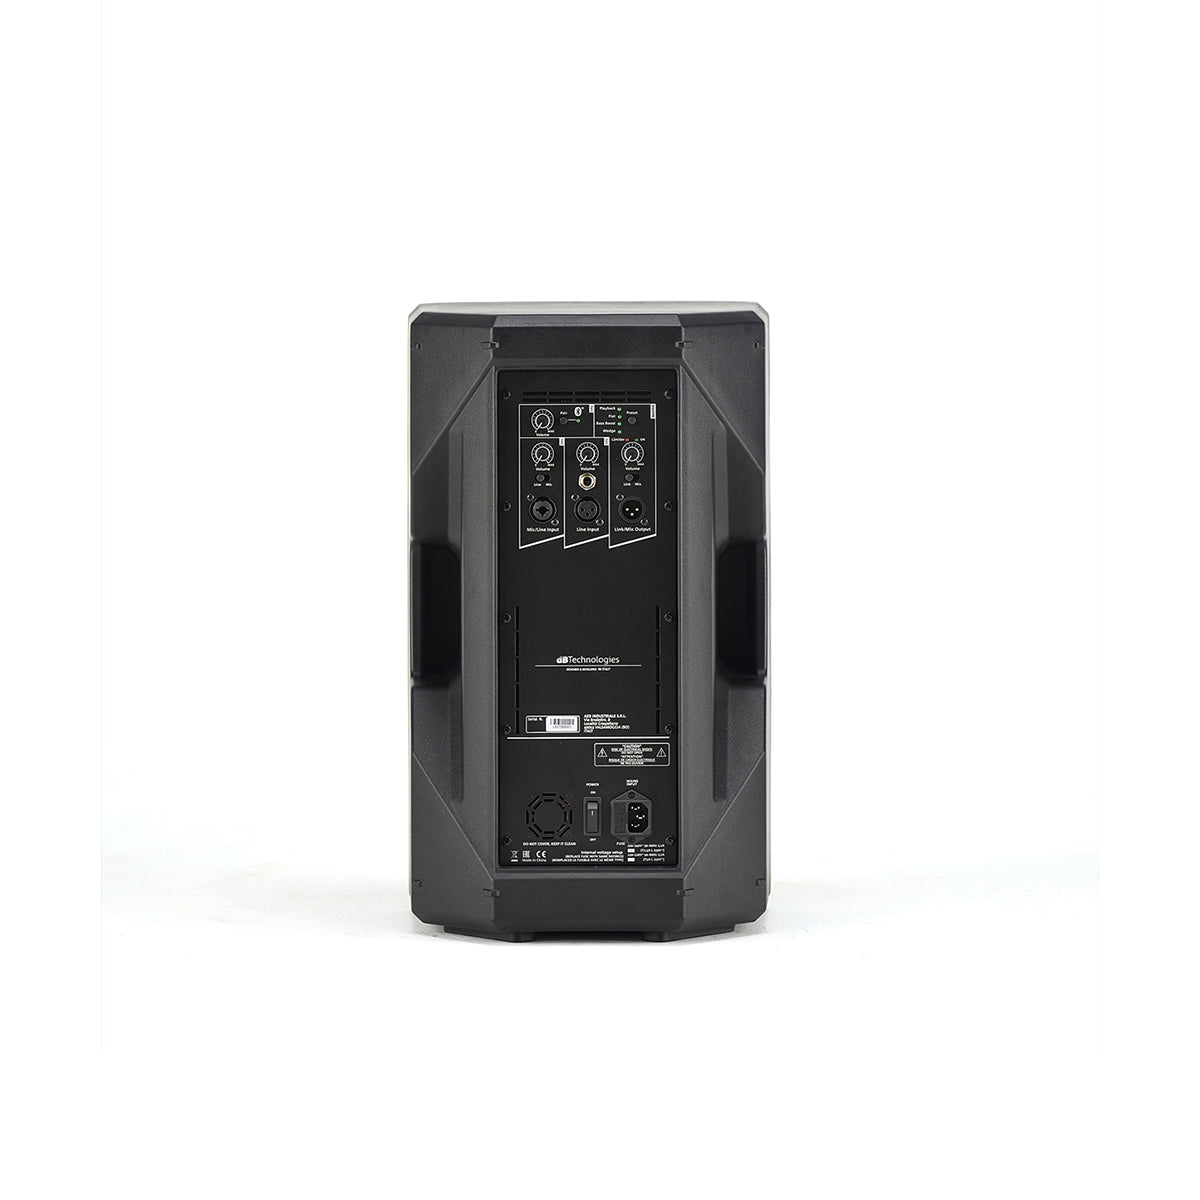 dB Technologies KL 10in 2 way active speaker with Bluetooth